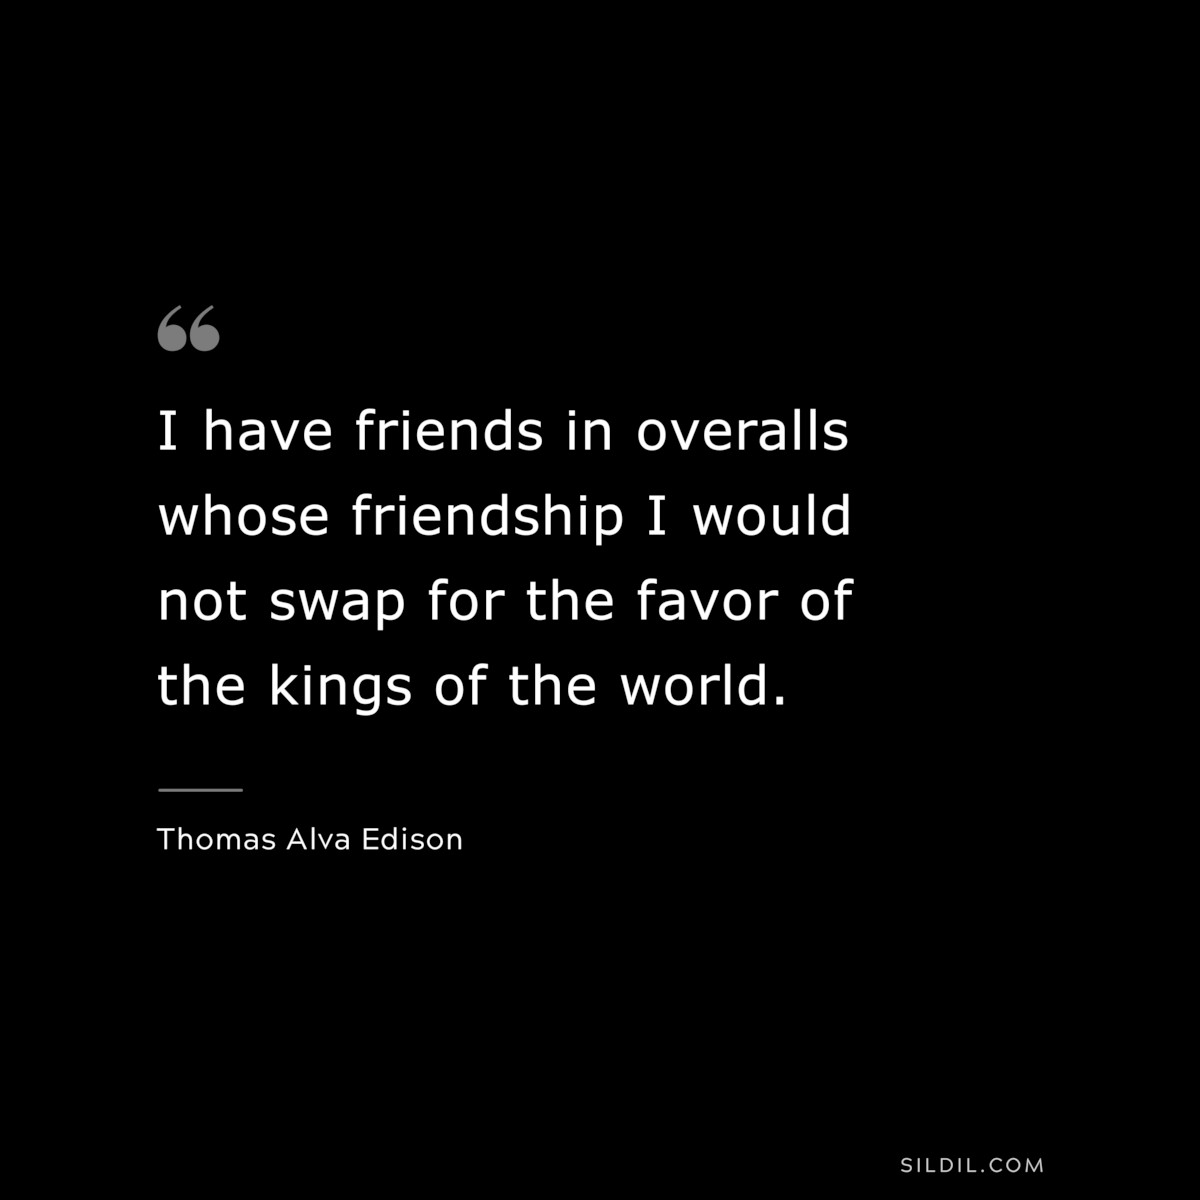 I have friends in overalls whose friendship I would not swap for the favor of the kings of the world. ― Thomas Alva Edison